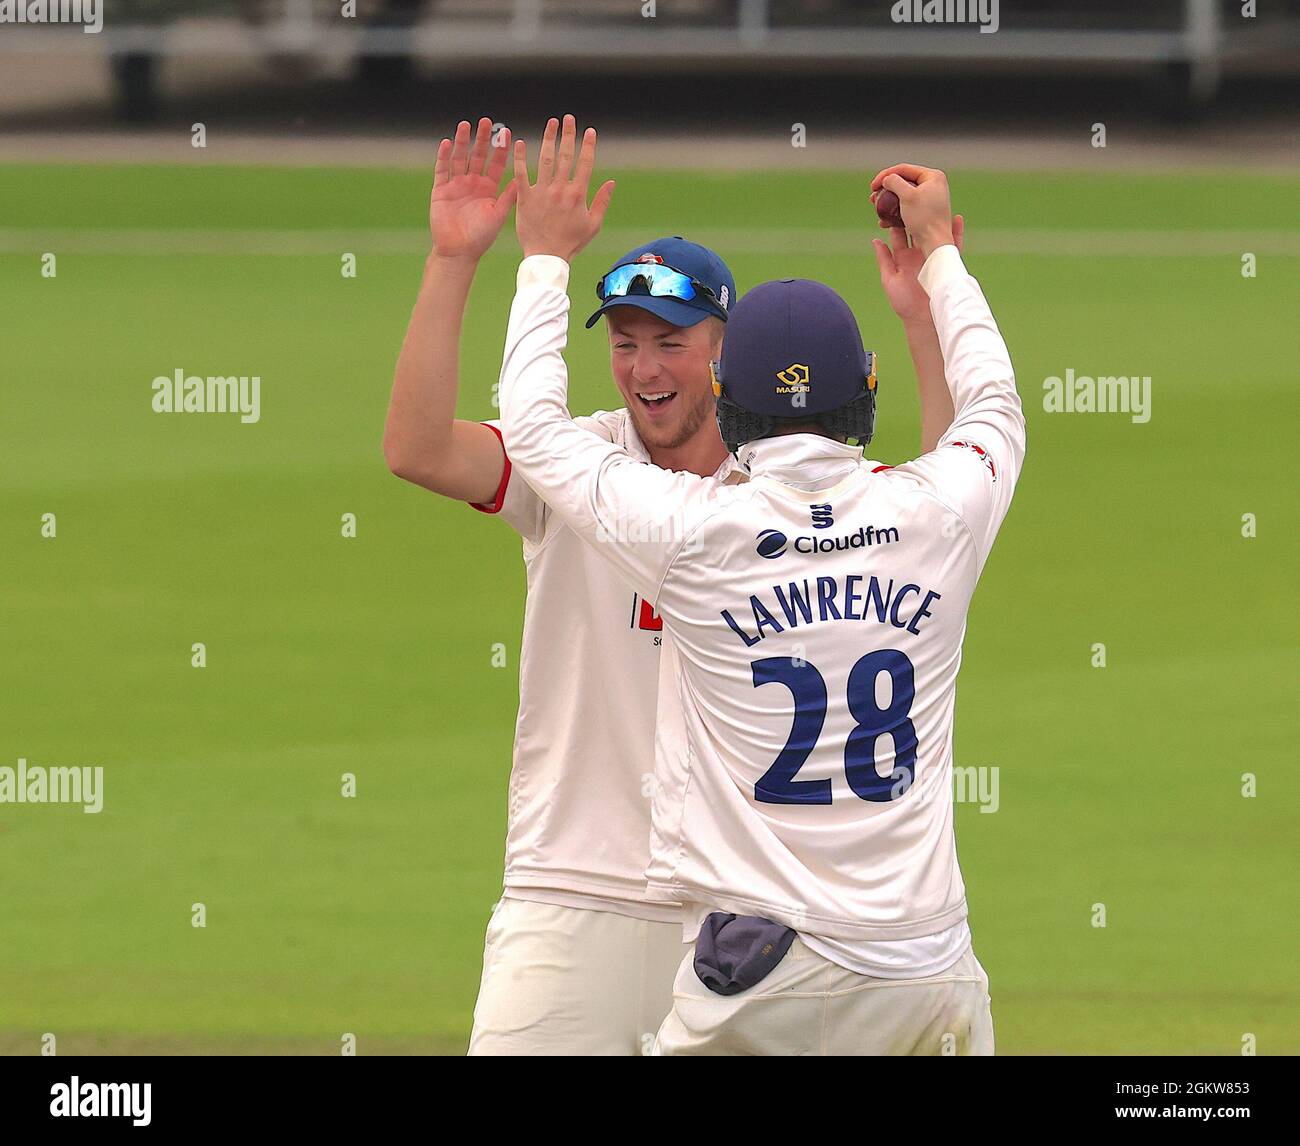 15 September, 2021. London, UK. Dan Lawrence of Essex  celebrates after catching Surrey’s Ryan Patel as Surrey take on Essex in the County Championship at the Kia Oval, day three David Rowe/Alamy Live News Stock Photo